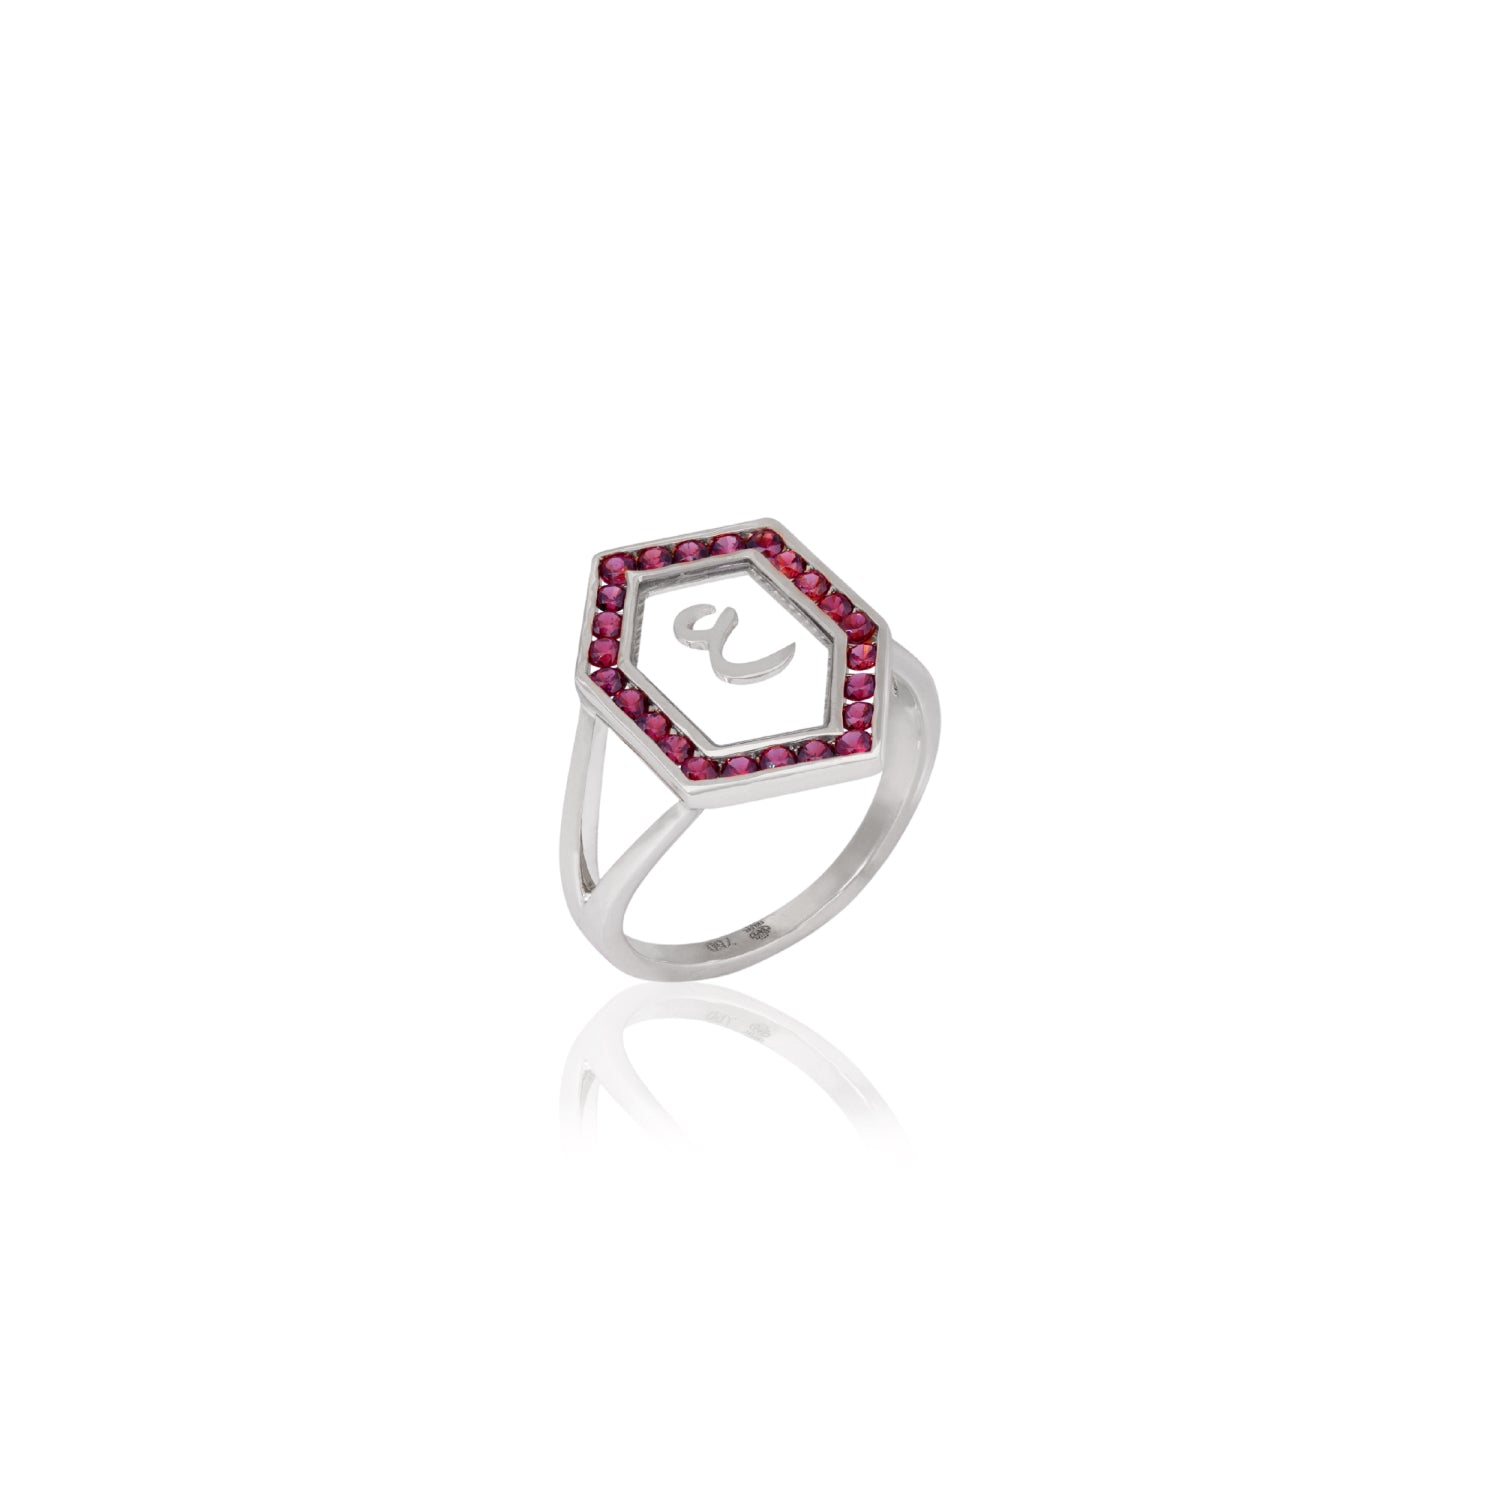 Qamoos 1.0 Letter ع Ruby Ring in White Gold